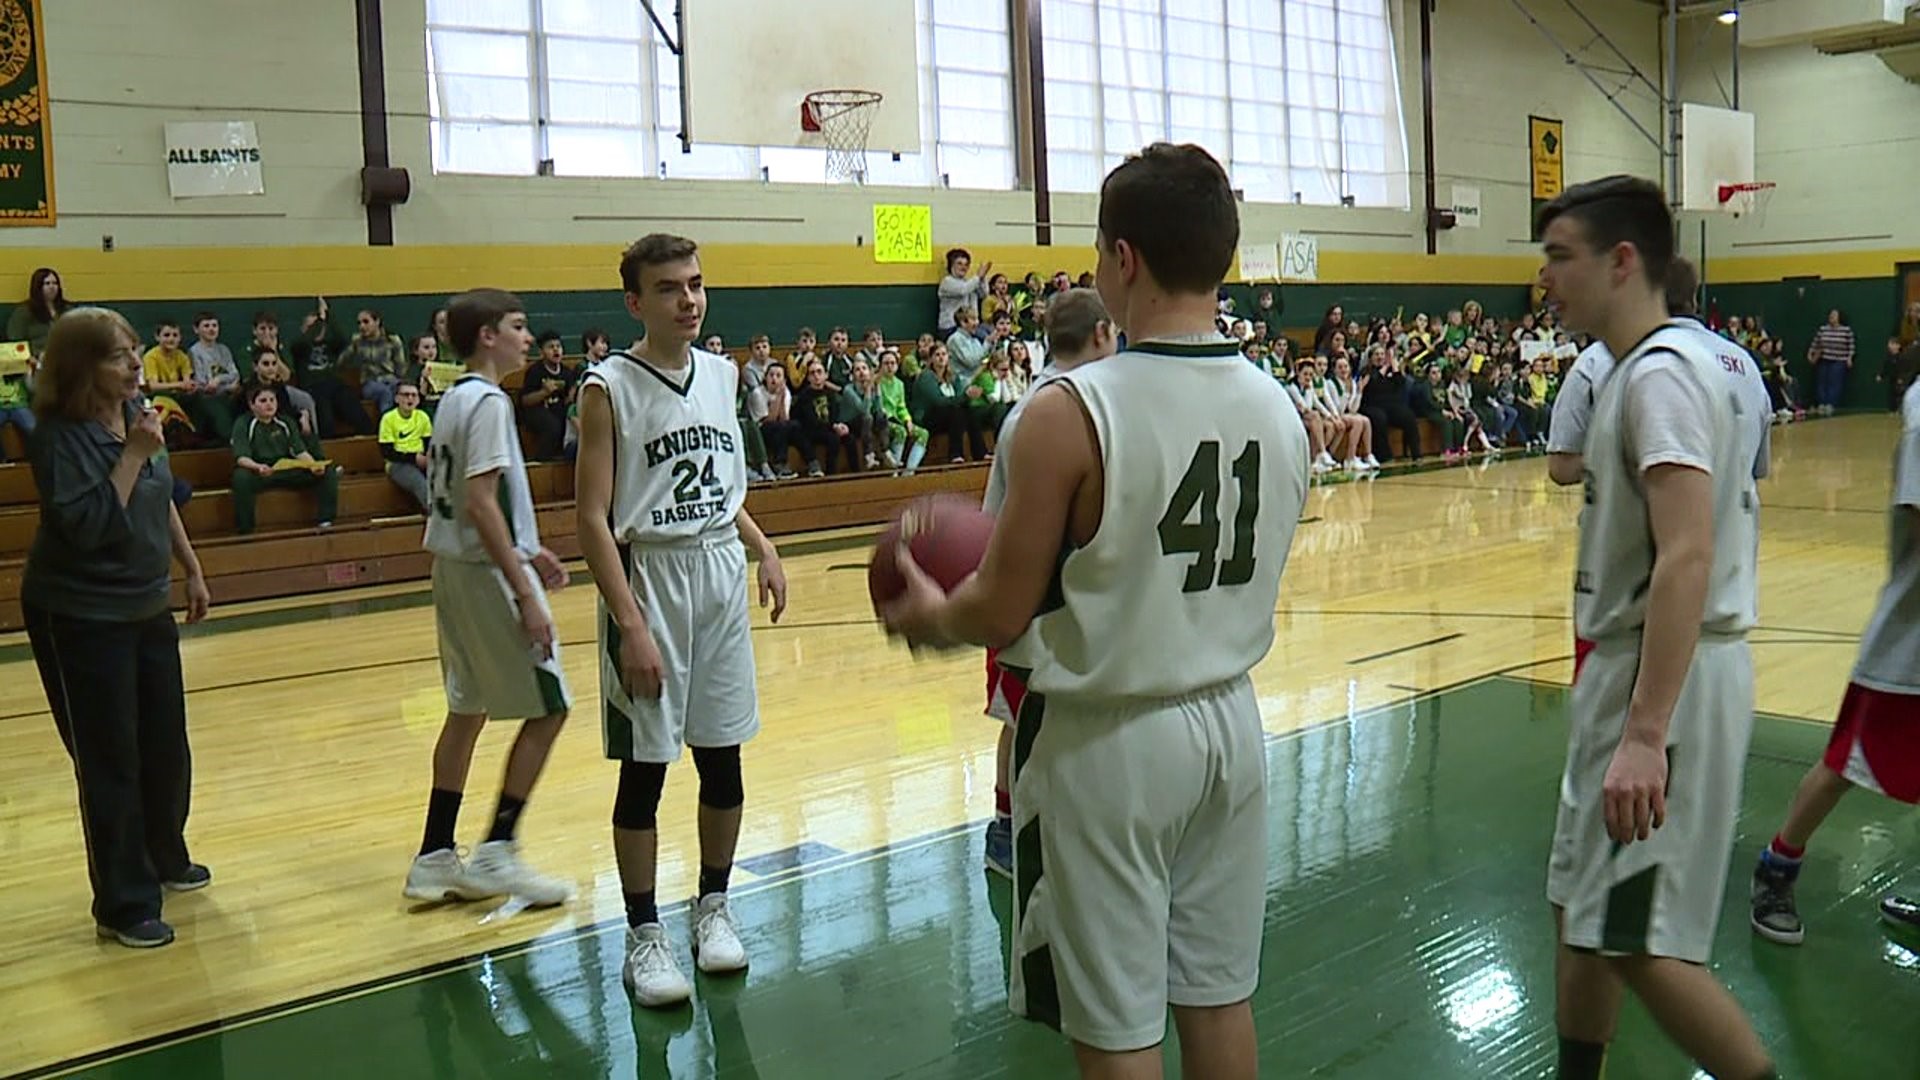 Students Come Together for a Game of Hoops in Scranton